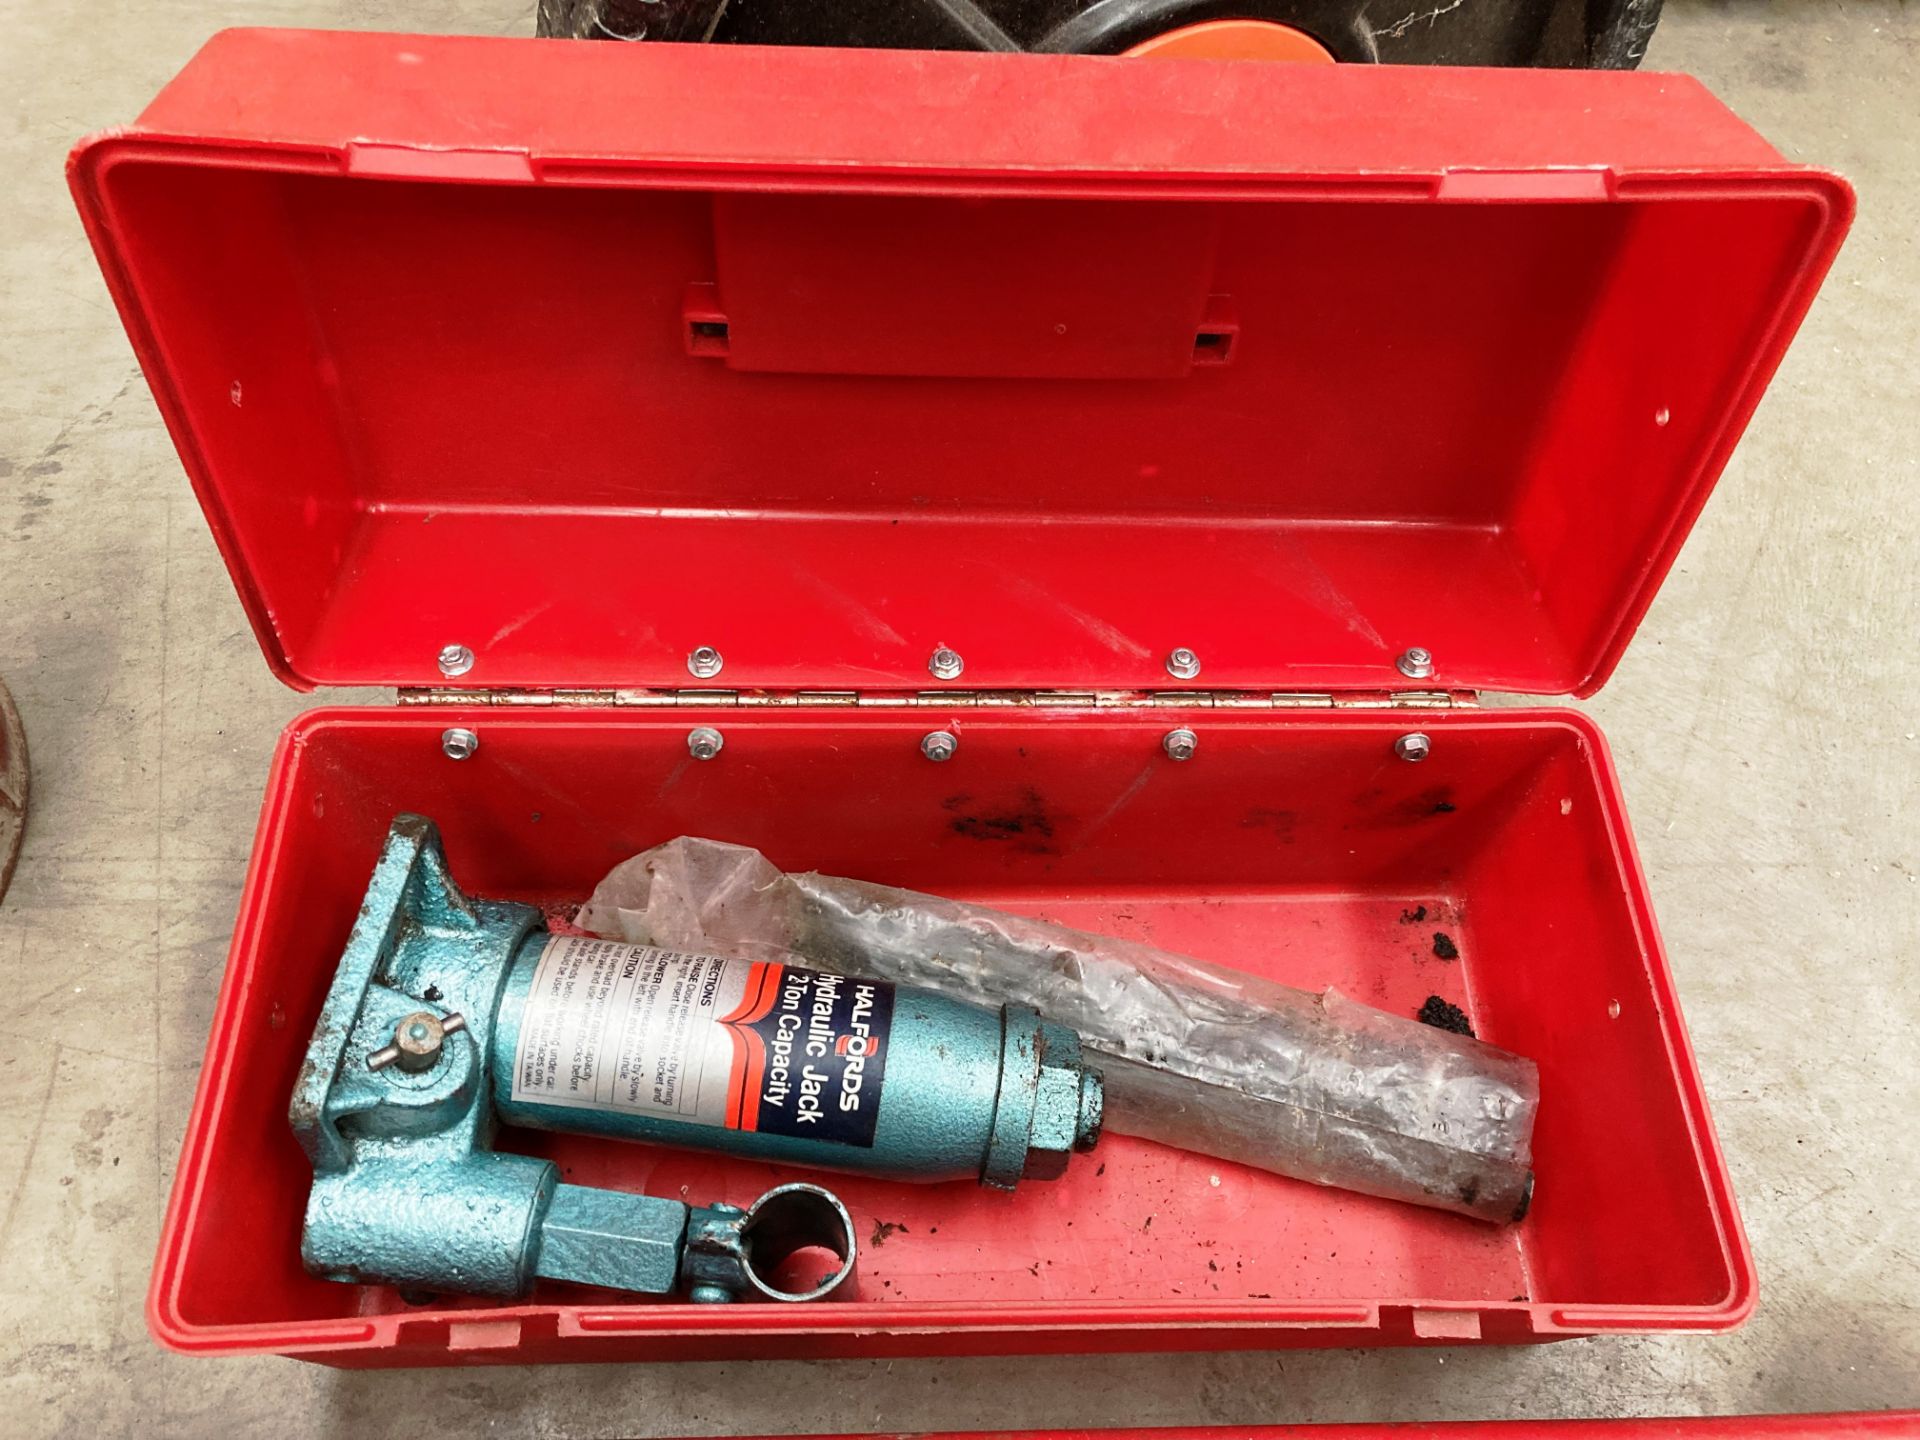 A Halfords two ton hydraulic jack in case